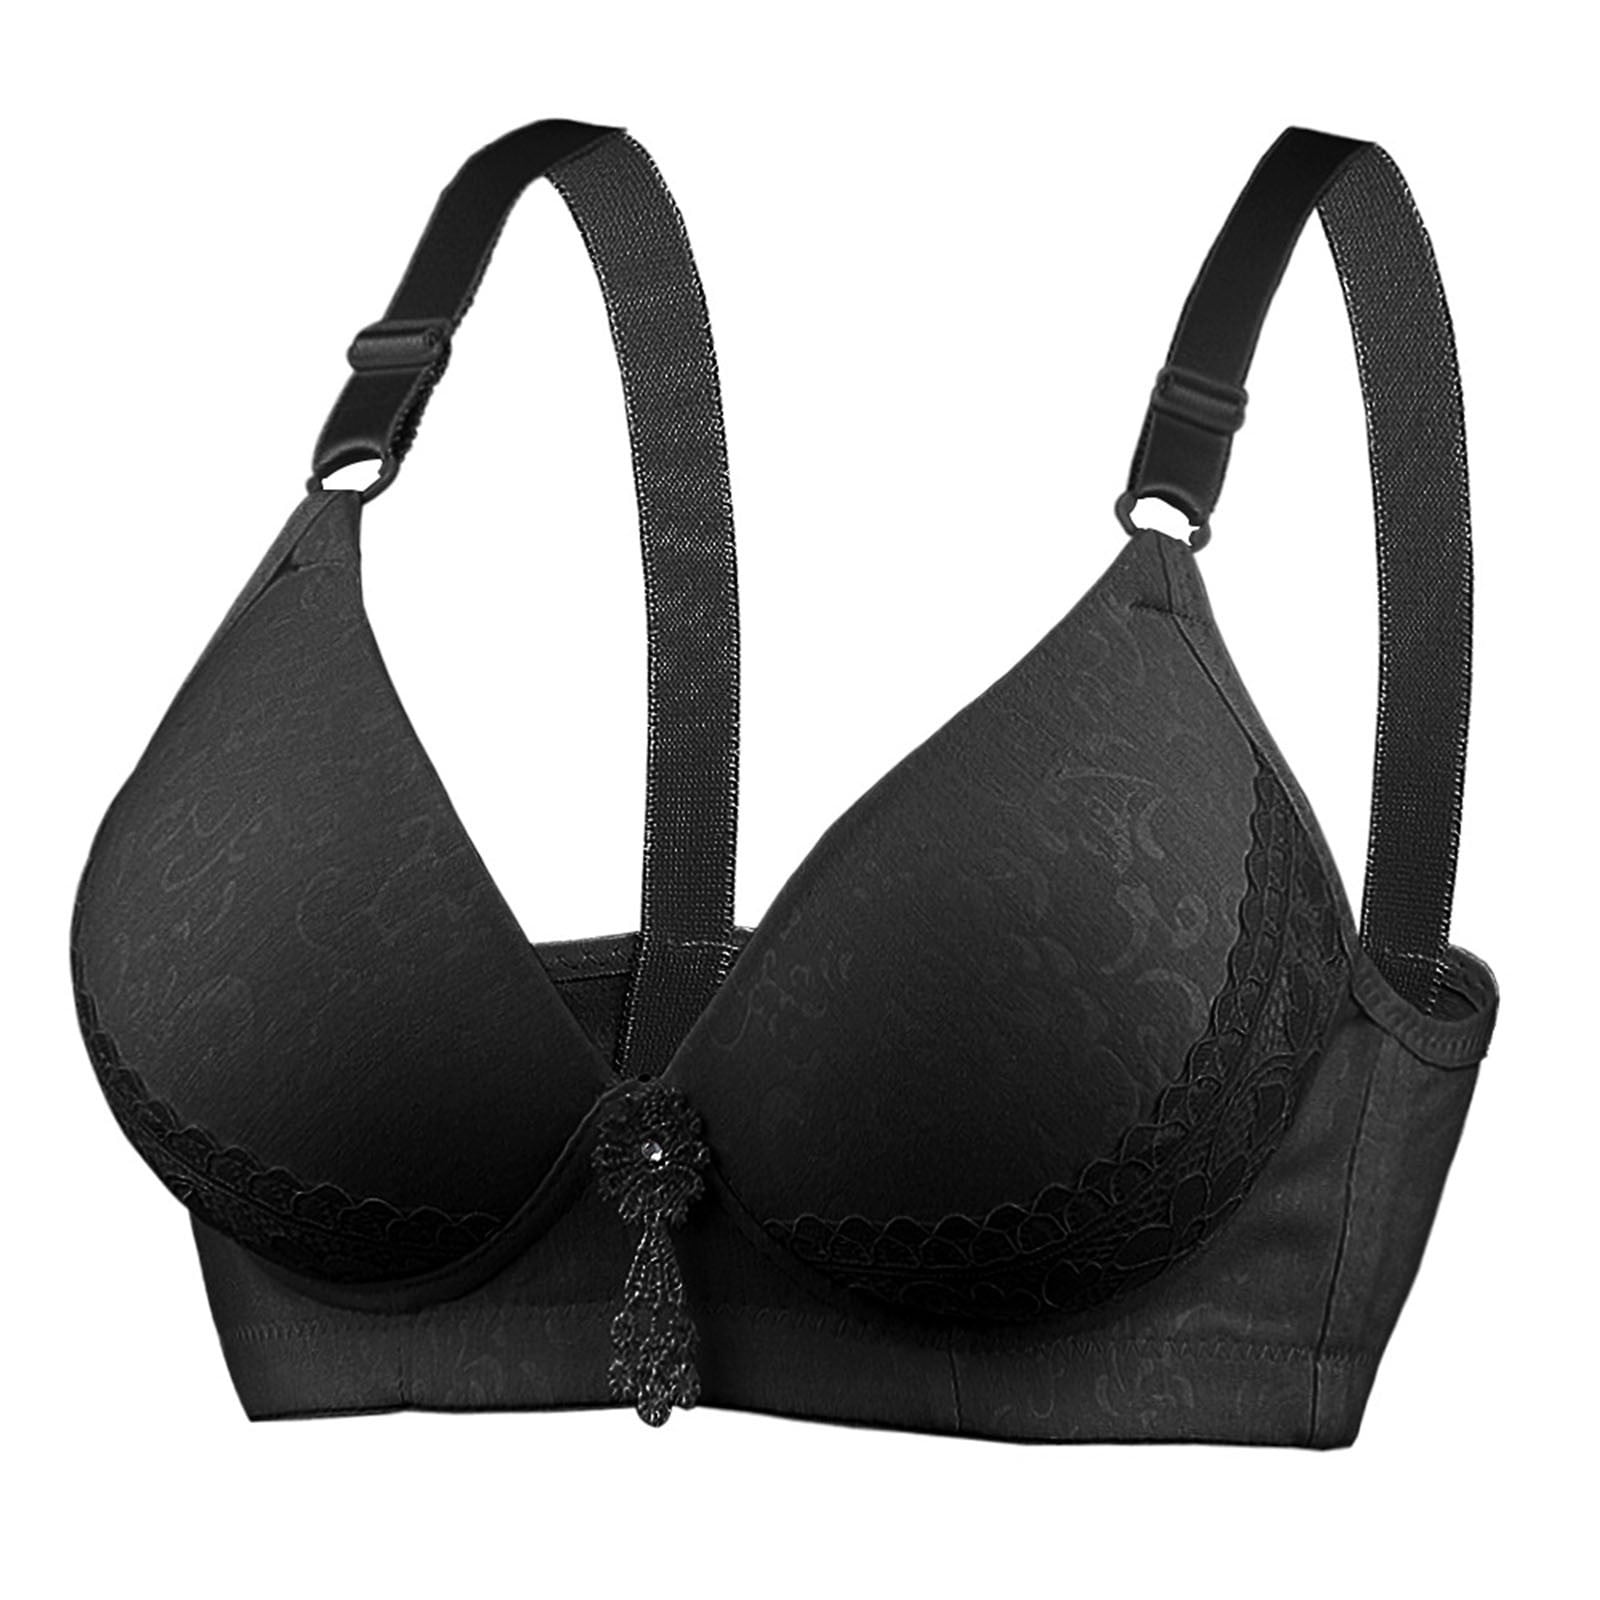 Backless Bras for Women, Women's Comfortable Lace Breathable